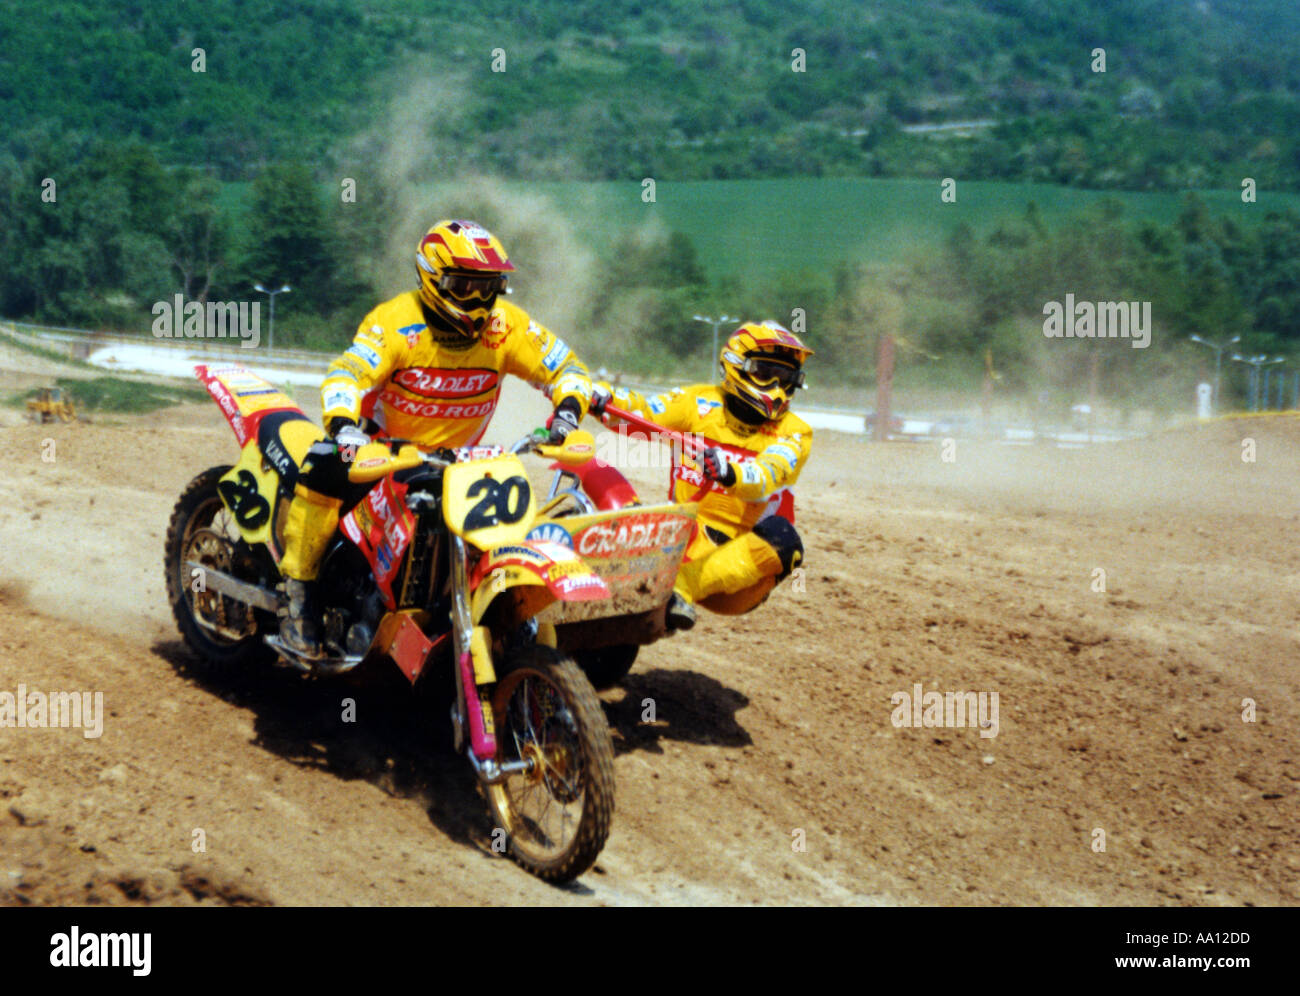 race of motorcycles with sidecars Stock Photo